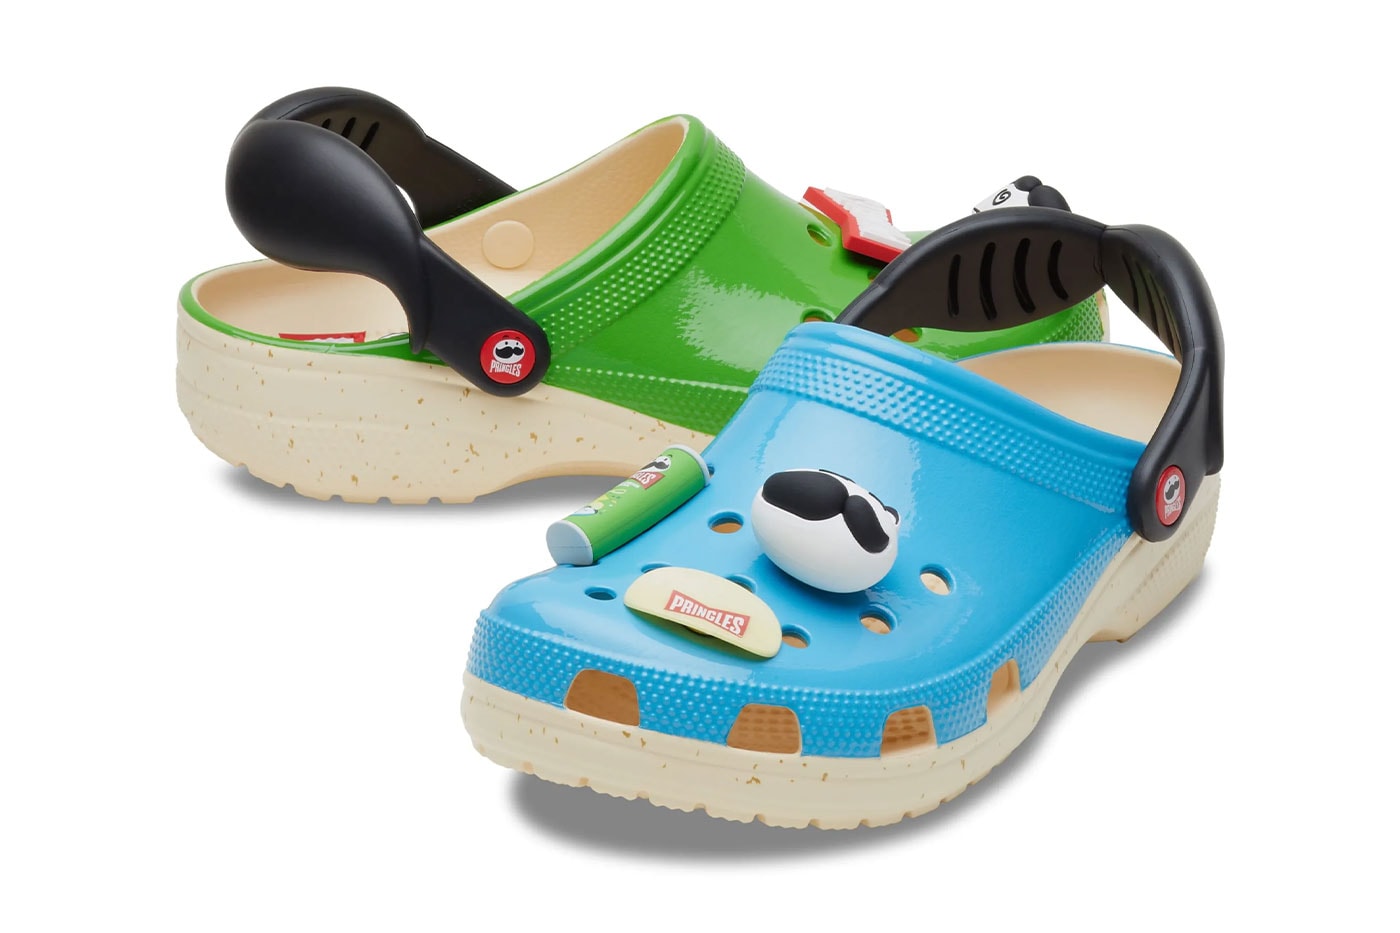 Pringles x Crocs Footwear Collaboration Collection Release Info